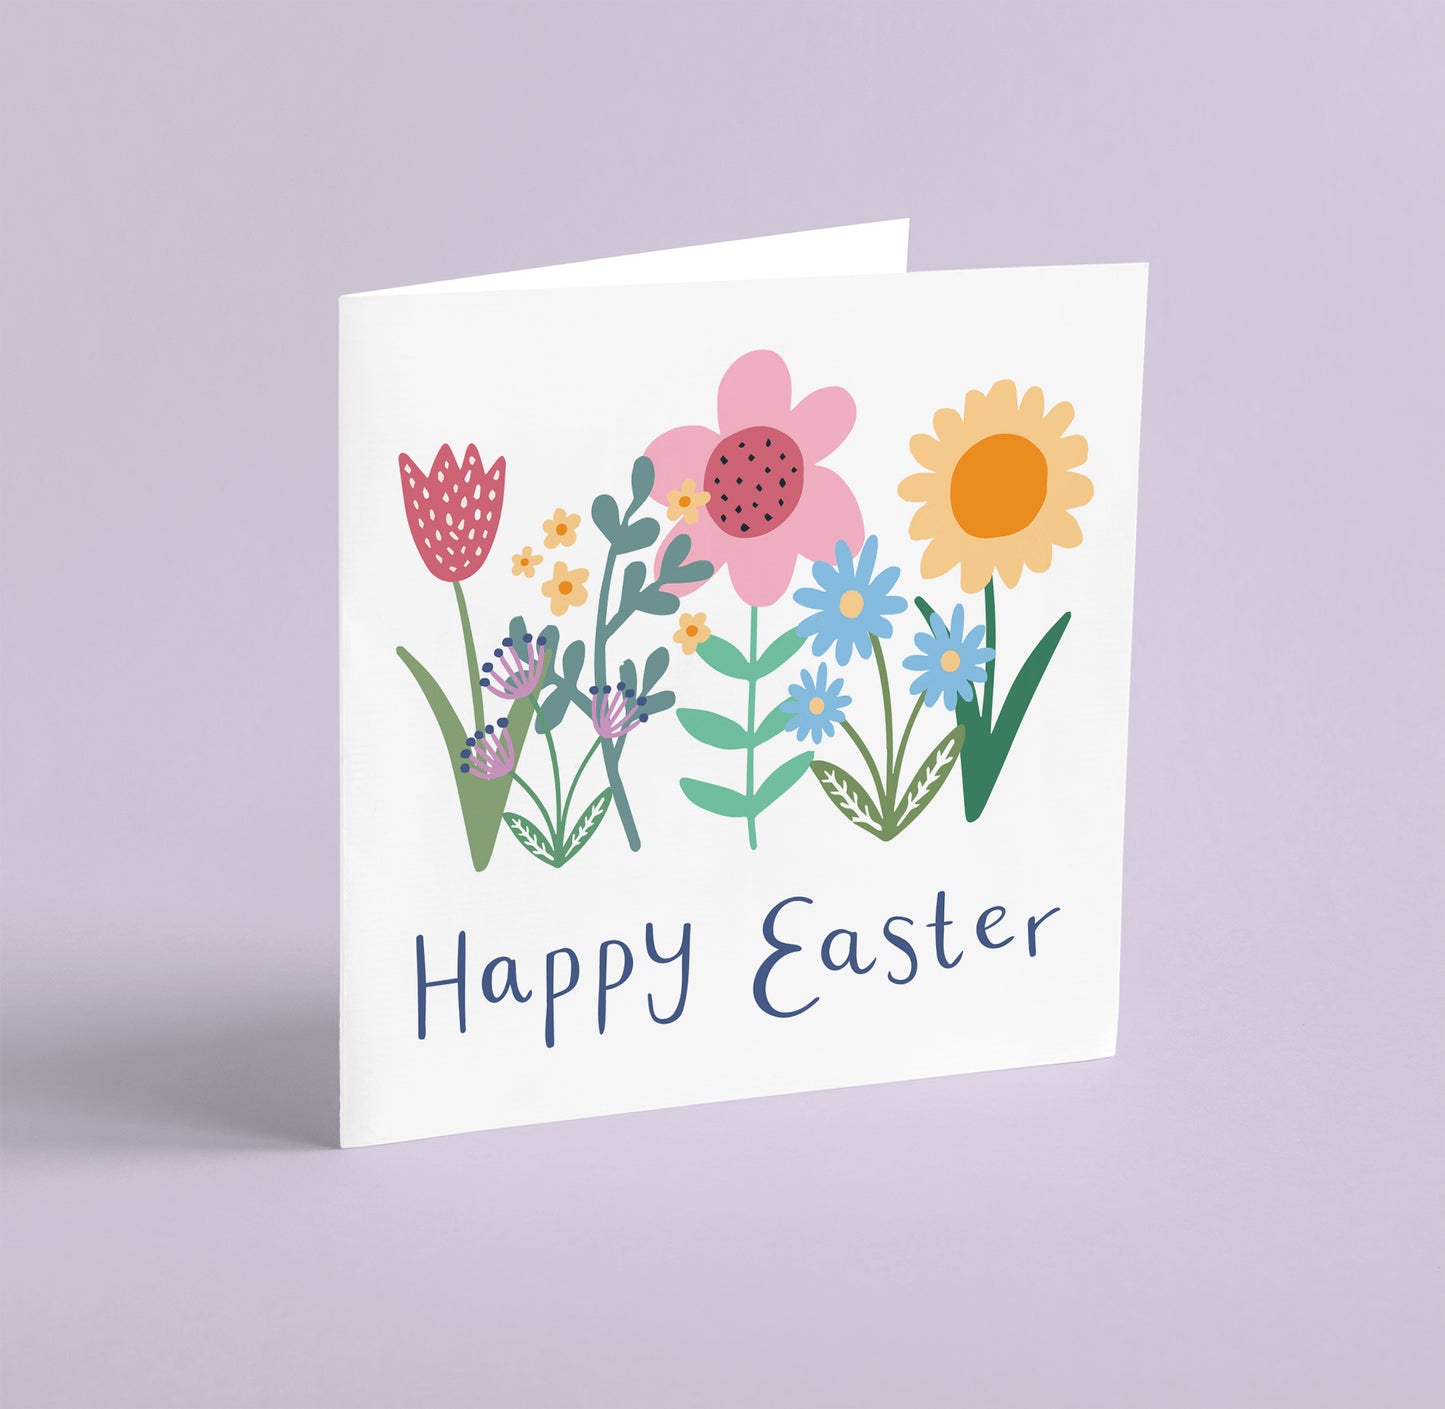 'Happy Easter' Square Greeting Card & Envelope